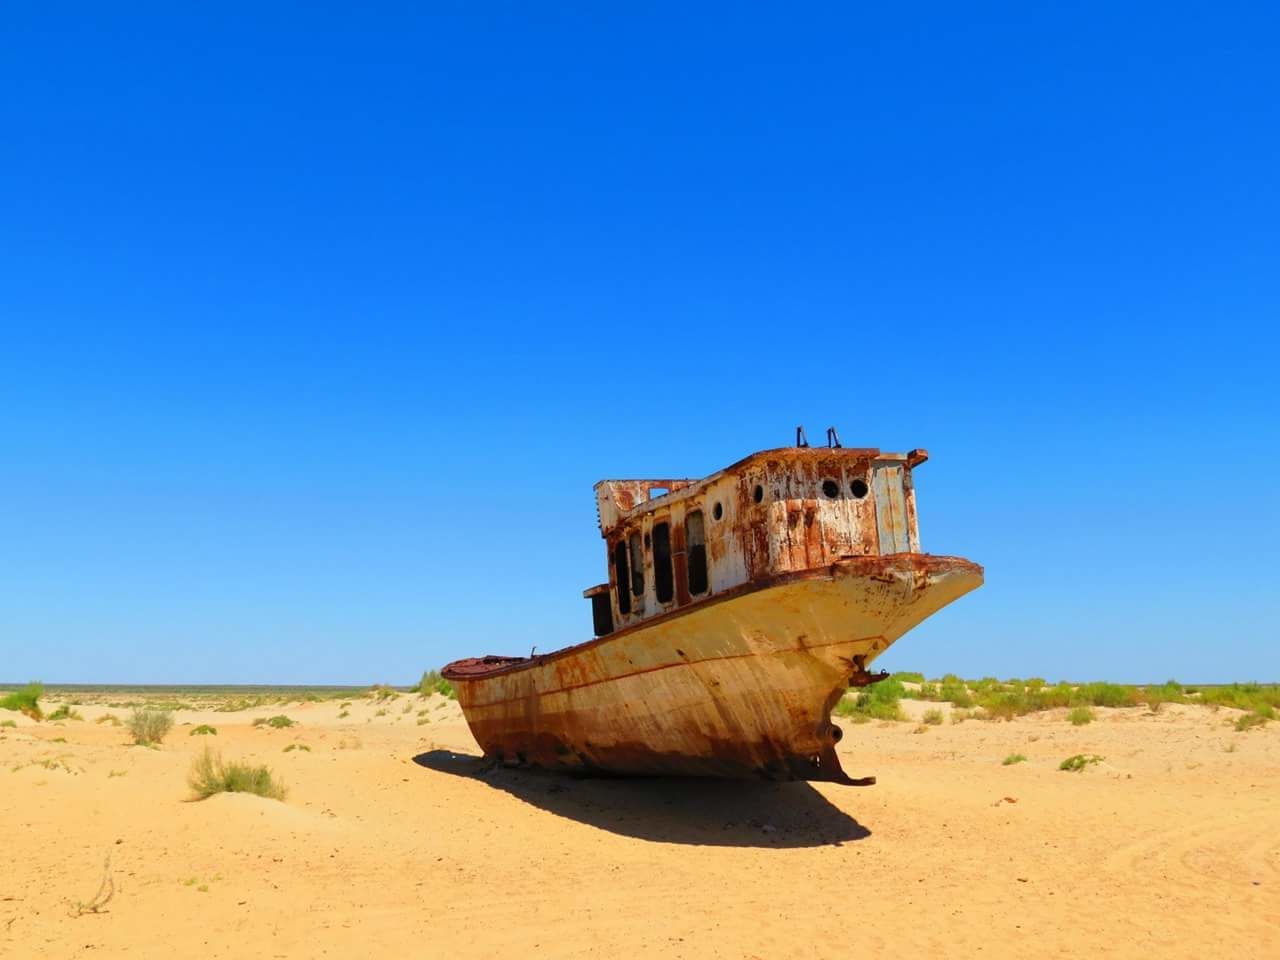 Abandoned boat on sand against clear blue sky